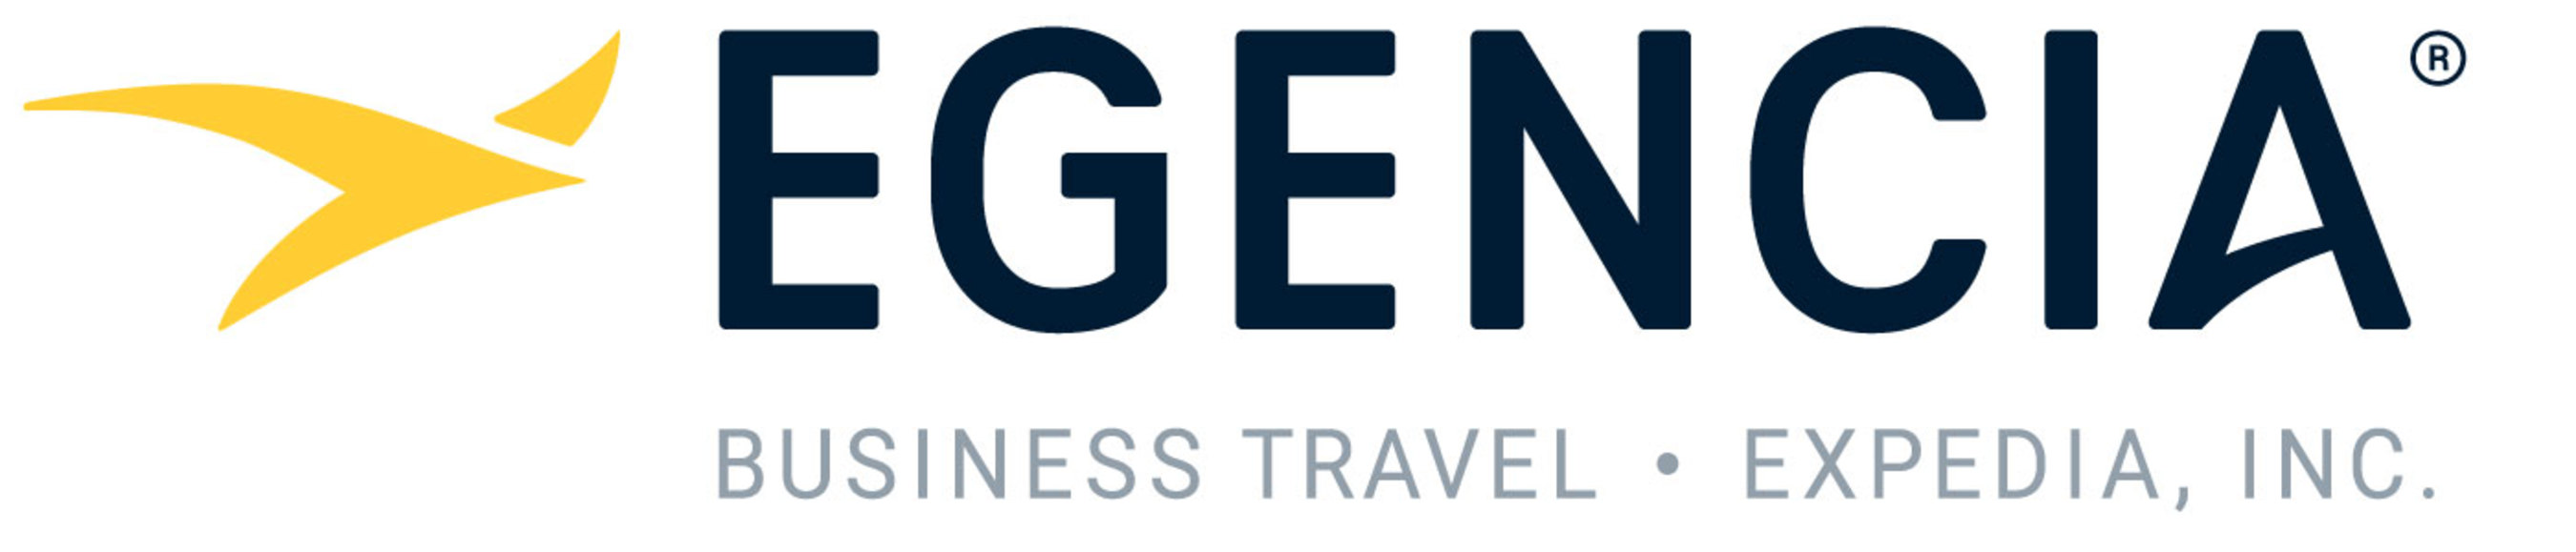 Egencia has successfully brought the technology heritage, relentless focus on user experience and innovative spirit of its parent company Expedia, Inc. into the enterprise. In 2013, Egencia launched its new app, Egencia TripNavigator, which dramatically improves the in-trip experience for business travelers. The app provides step-by-step navigation and offers integrated access to Egencia Travel Consultants. Today, 10,000 companies worldwide partner with Egencia to drive travel compliance and cost savings.